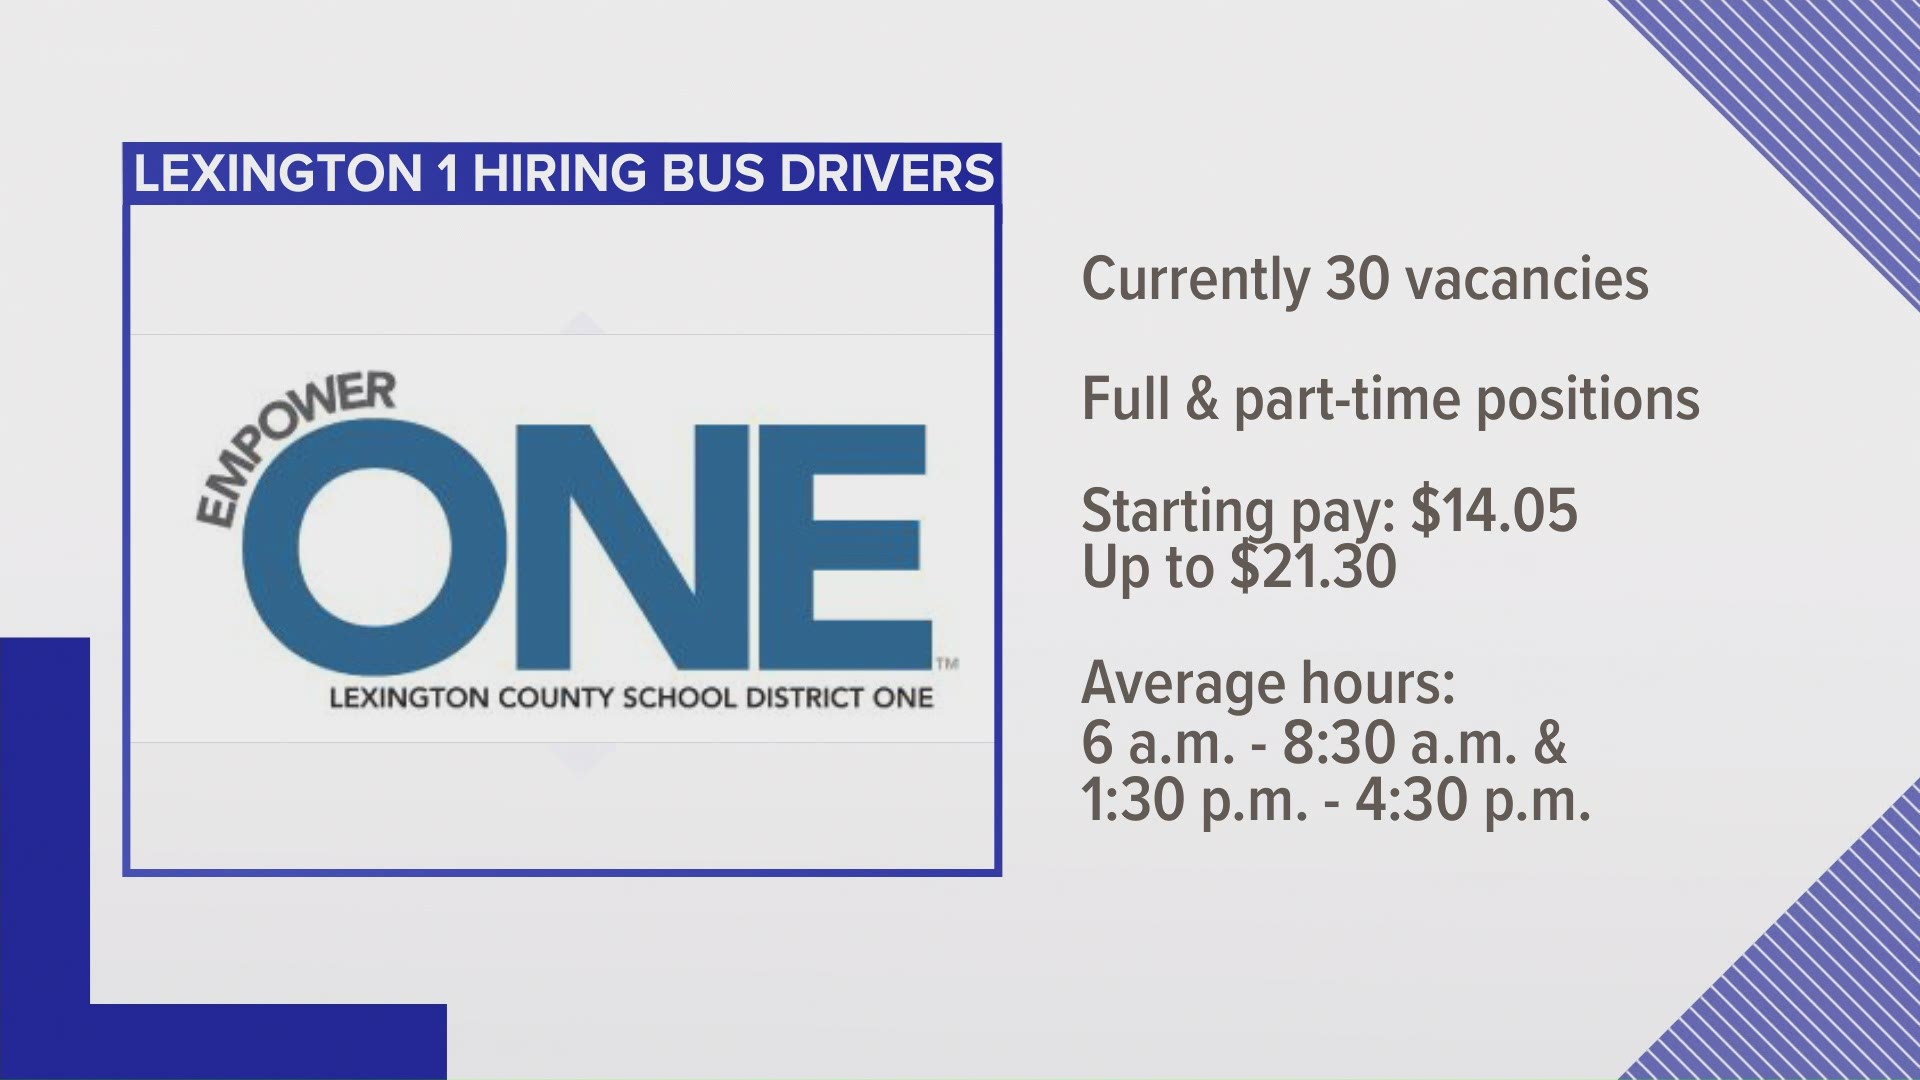 Lexington District One is looking for both part-time and full-time bus drivers. The district currently has 30 driver vacancies.